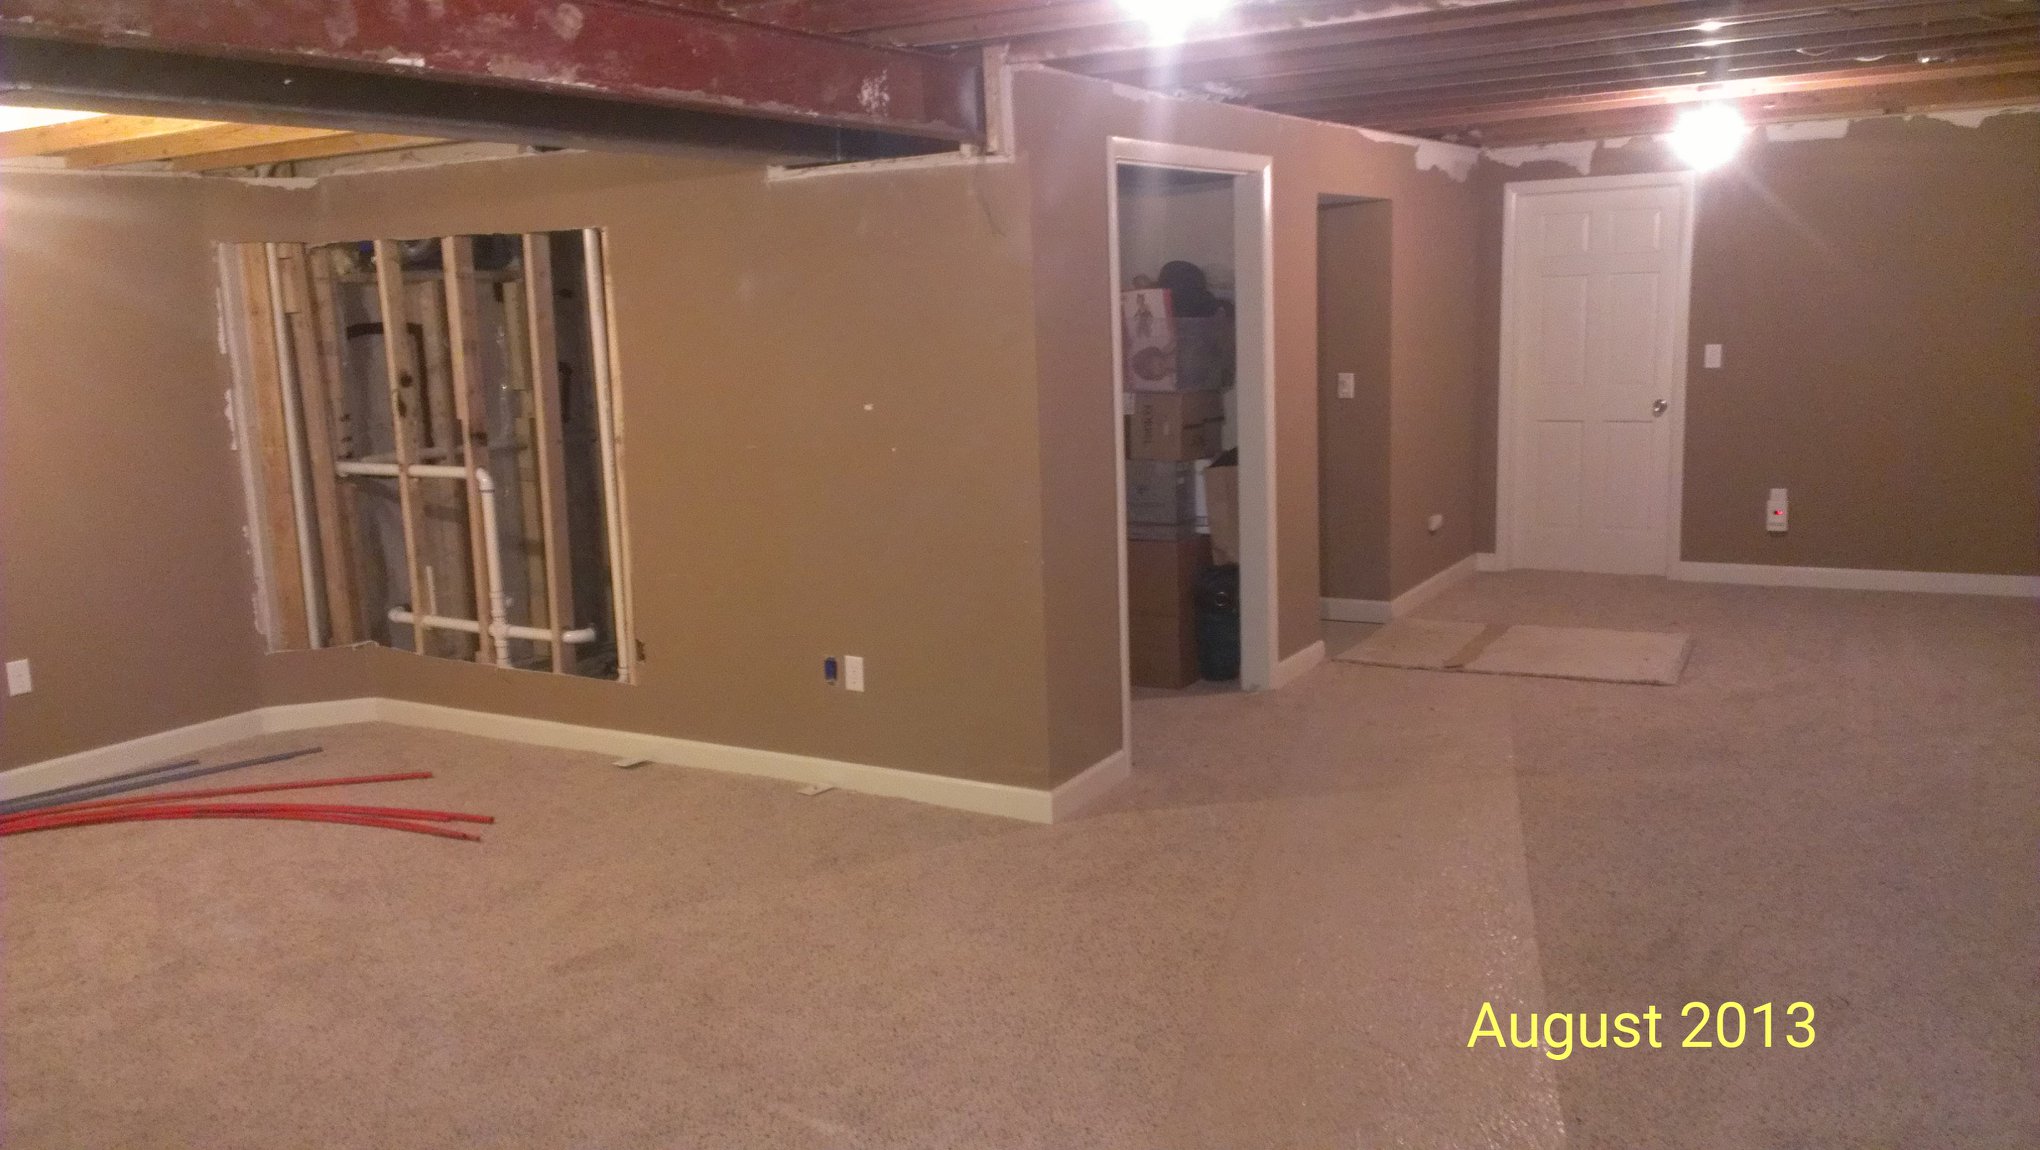 A finished basement with partially demolished drywall and a soffit dated August 2013.